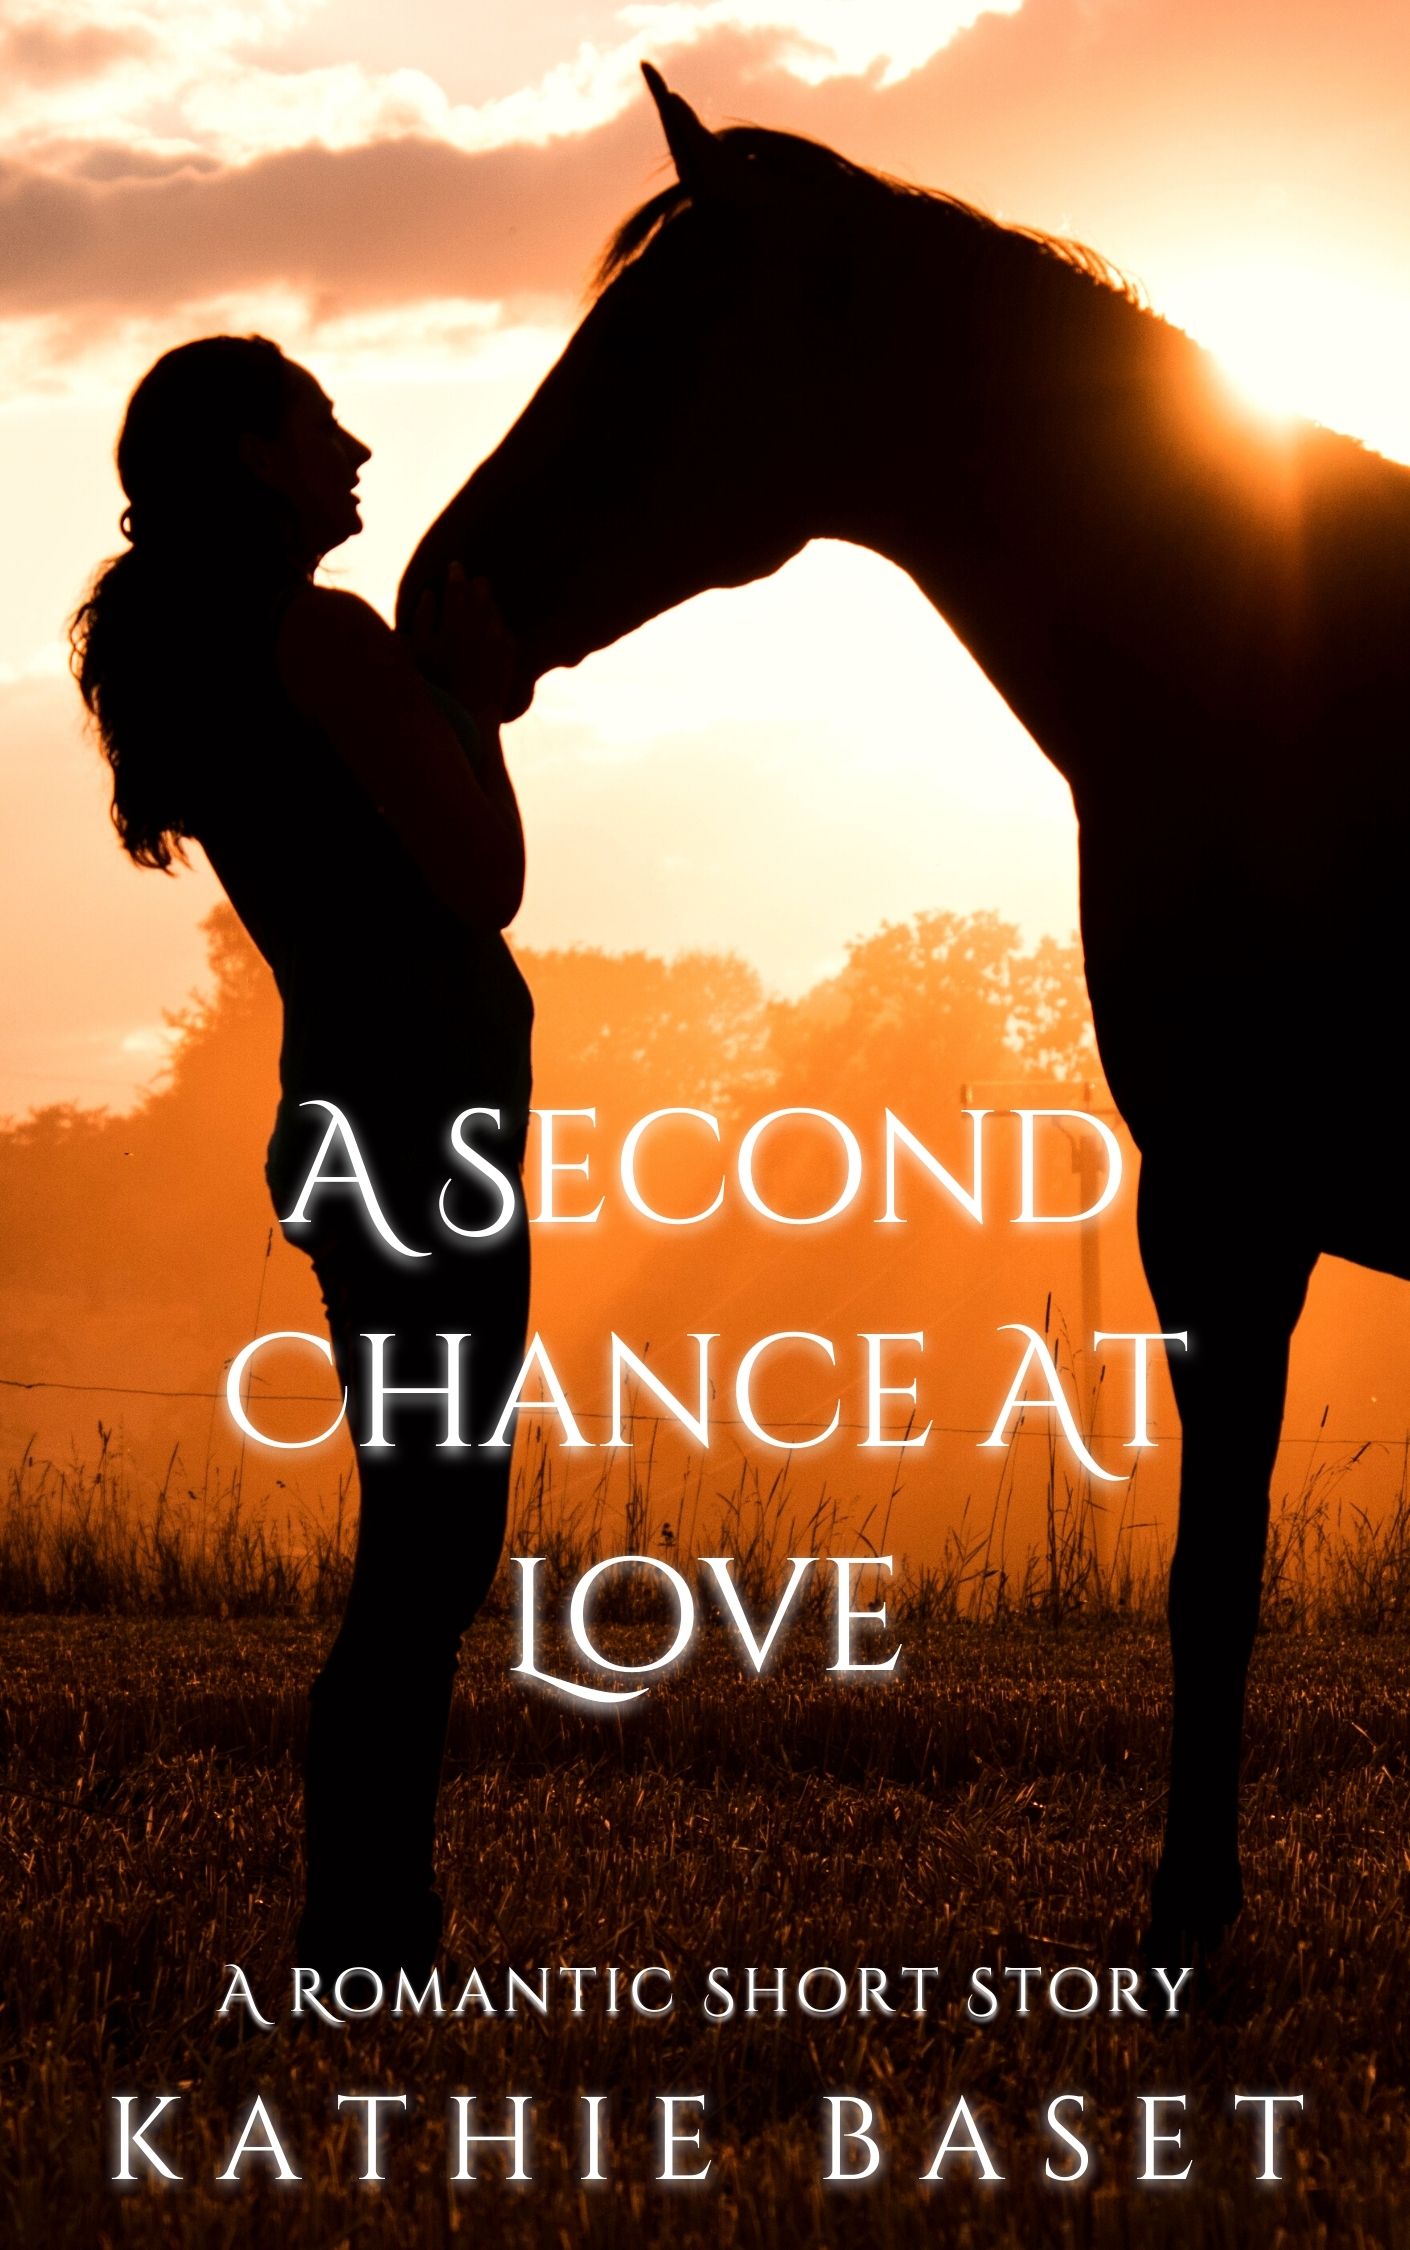 A second chance at love